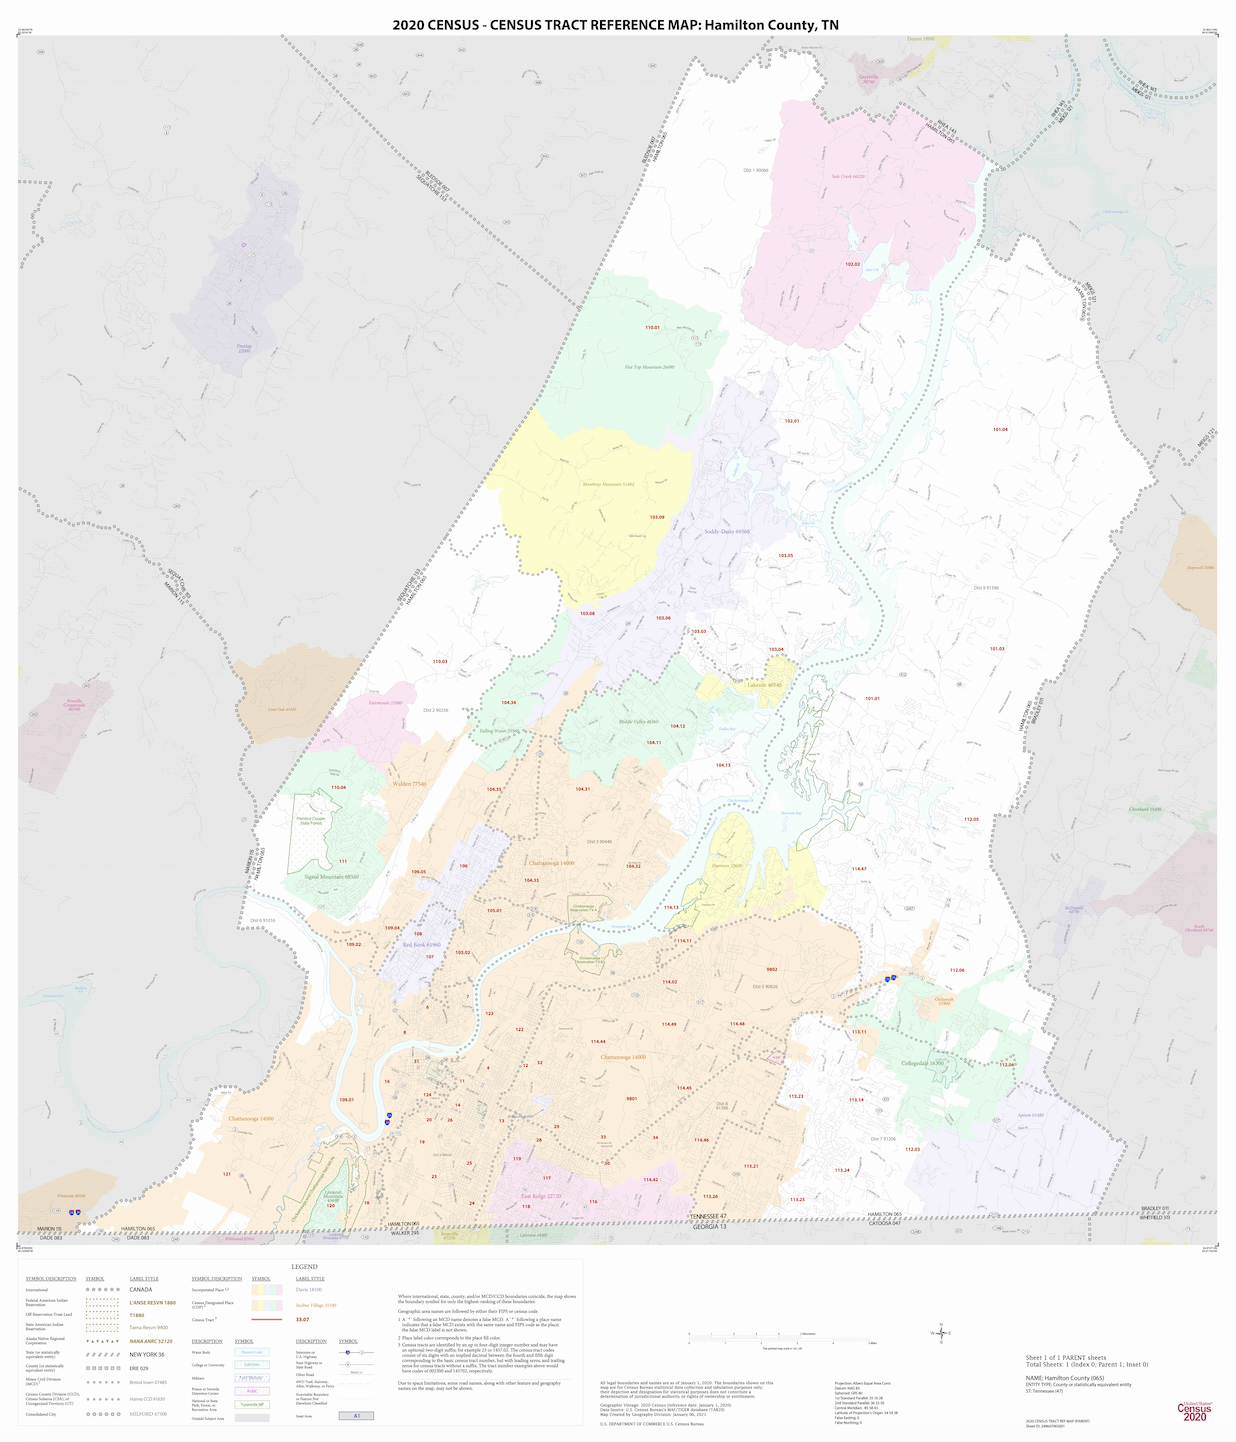 Census Tract reference map of Hamilton County, Tennessee